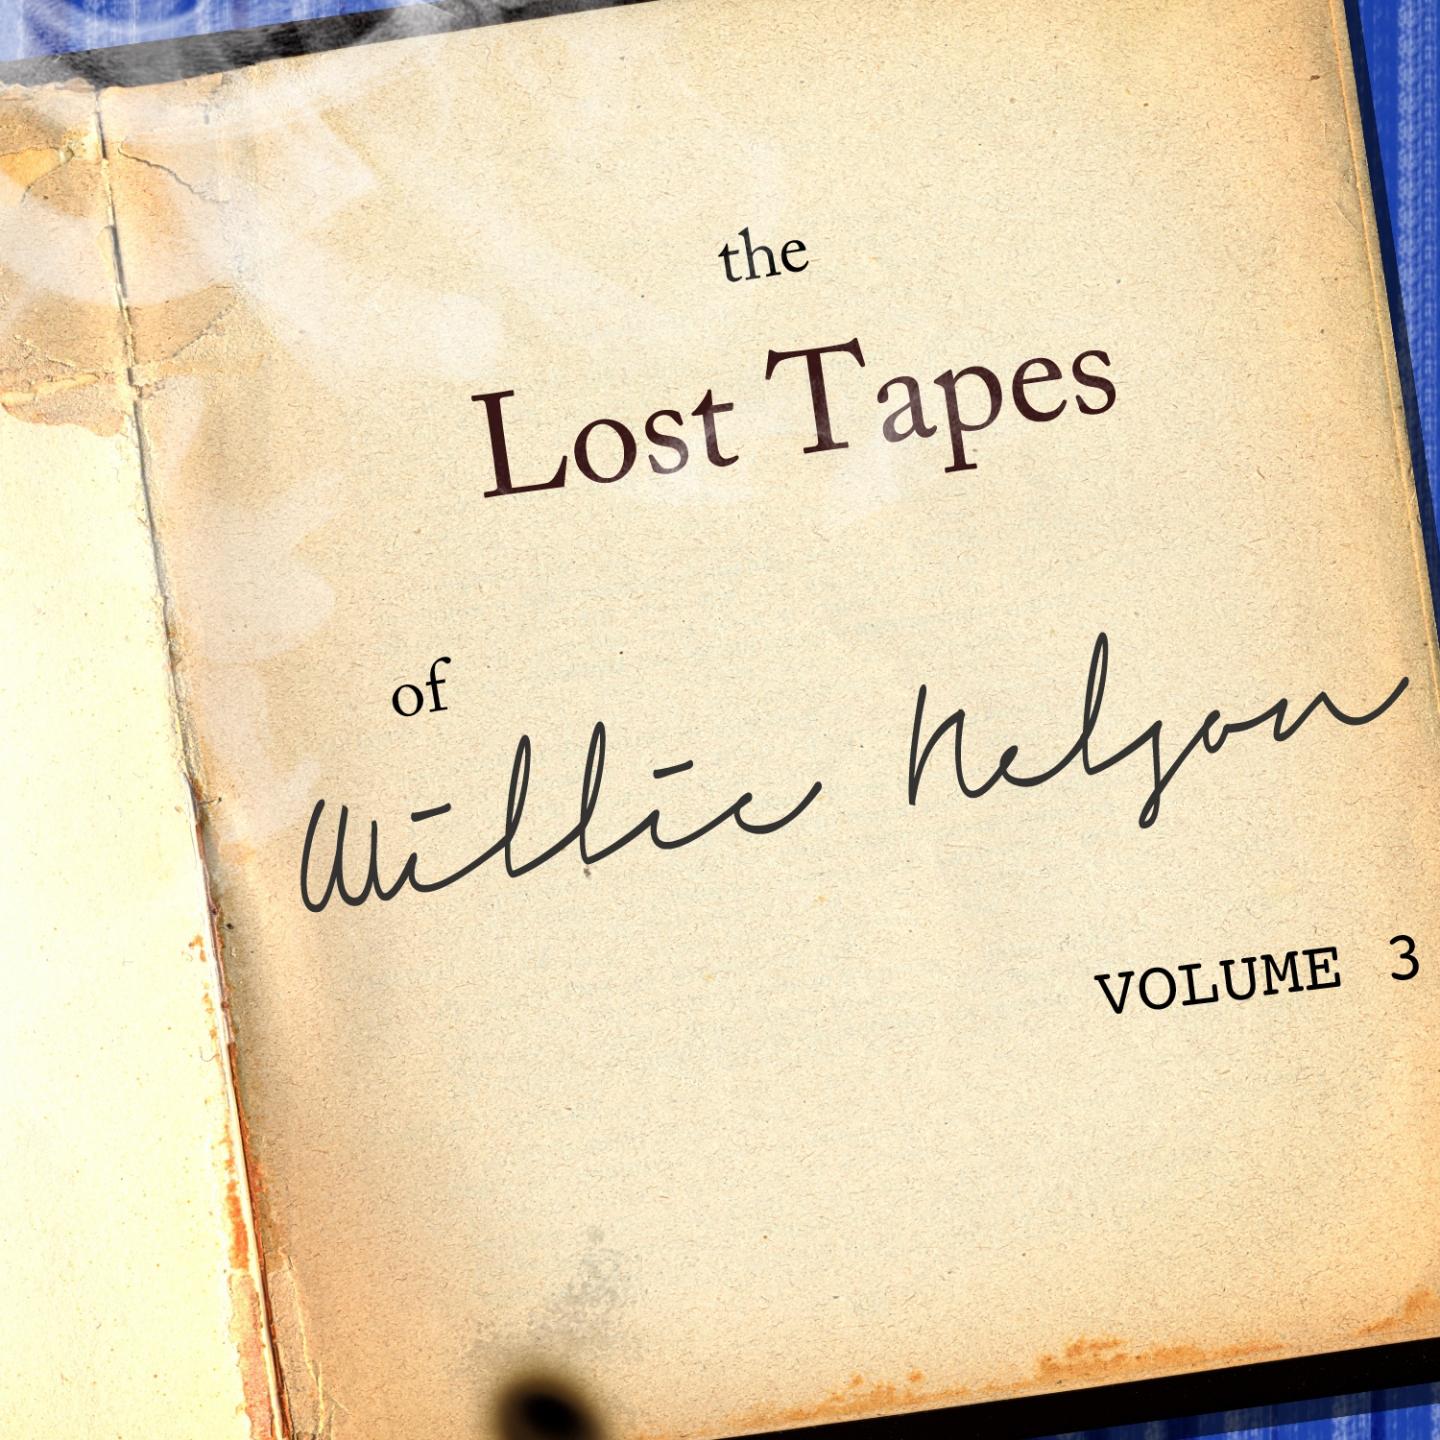 The Willie Nelson Lost Tapes, Vol. 3